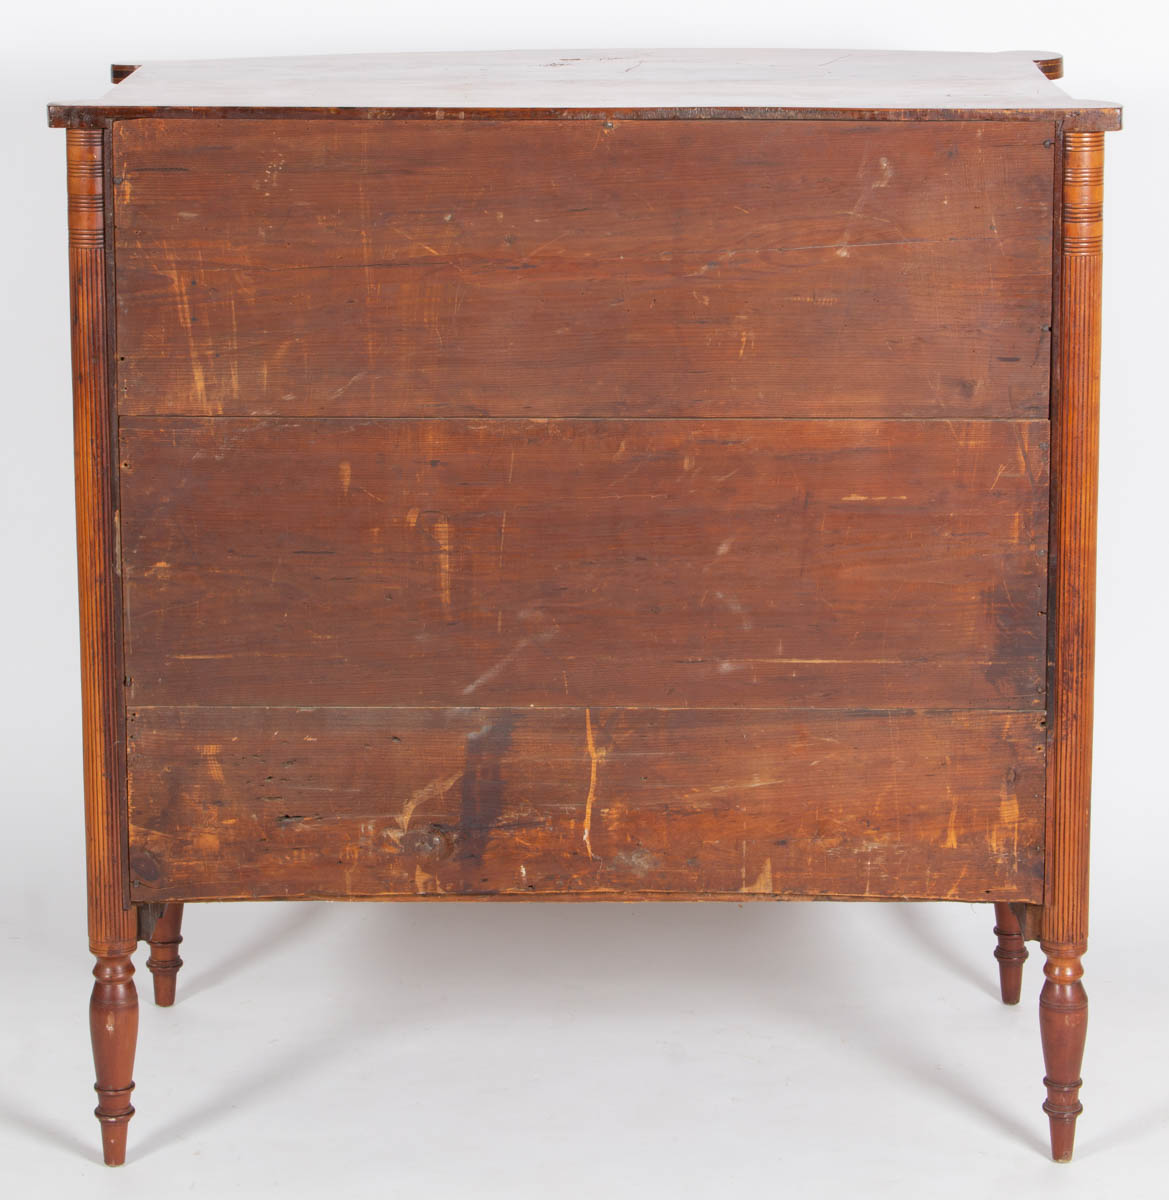 NEW ENGLAND LATE FEDERAL INLAID CHERRY AND FIGURED MAPLE HALF SIDEBOARD